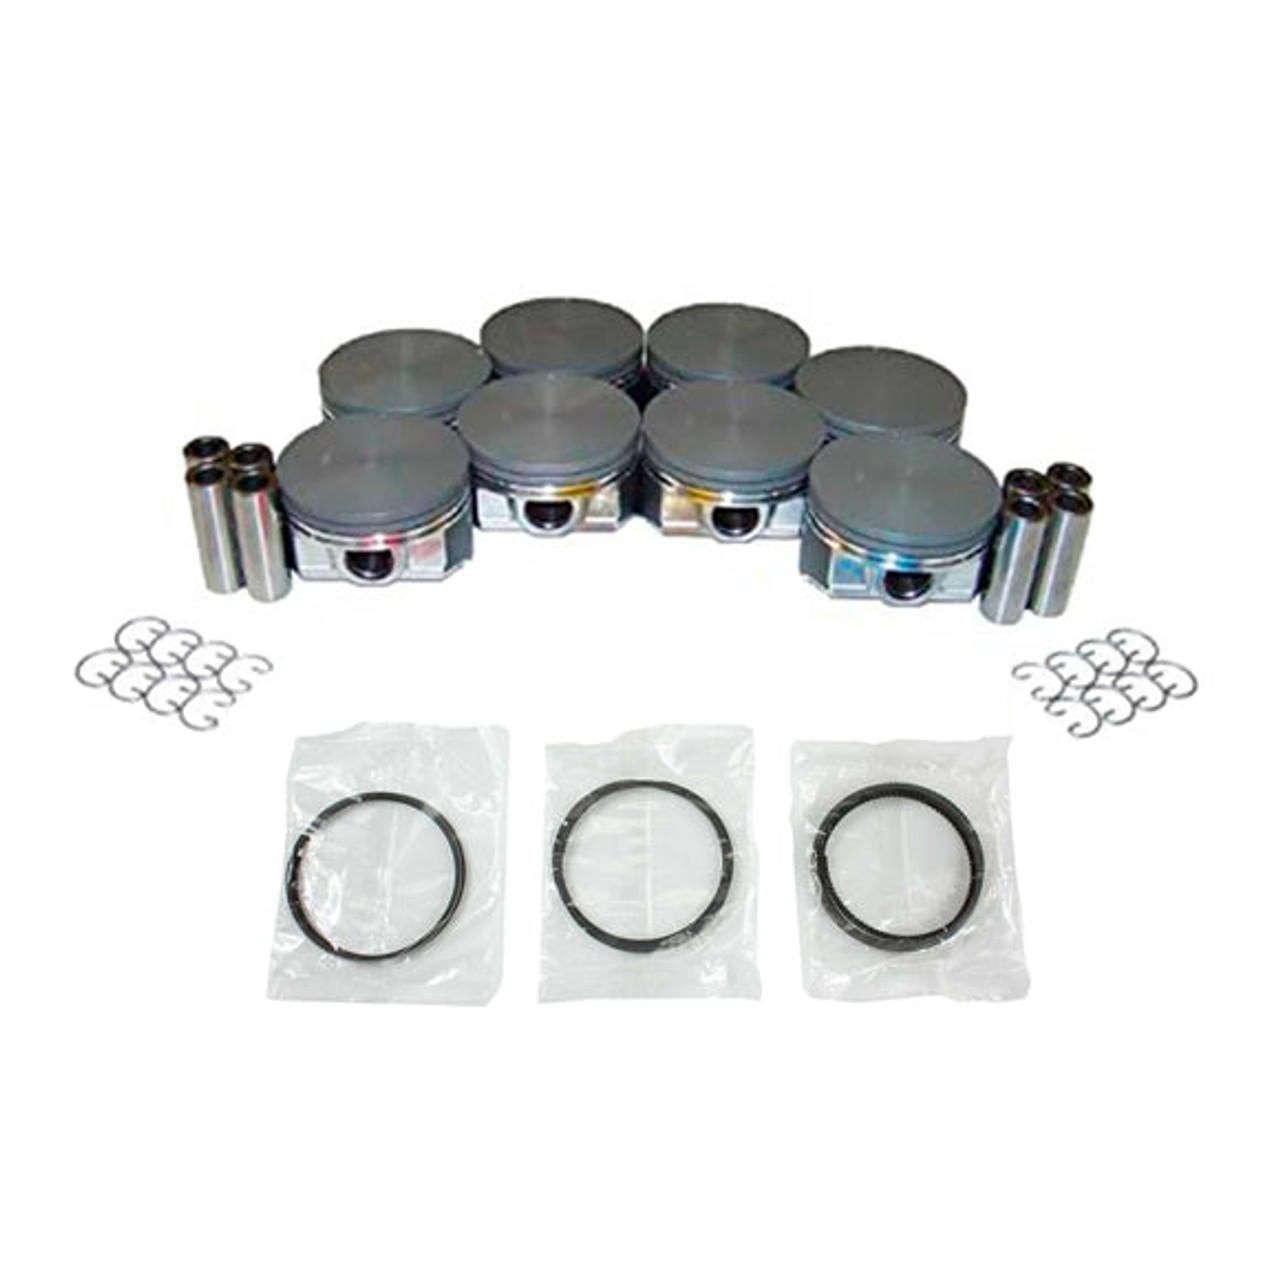 Piston Set with Rings - 2009 Hummer H3 5.3L Engine Parts # PRK3168ZE233